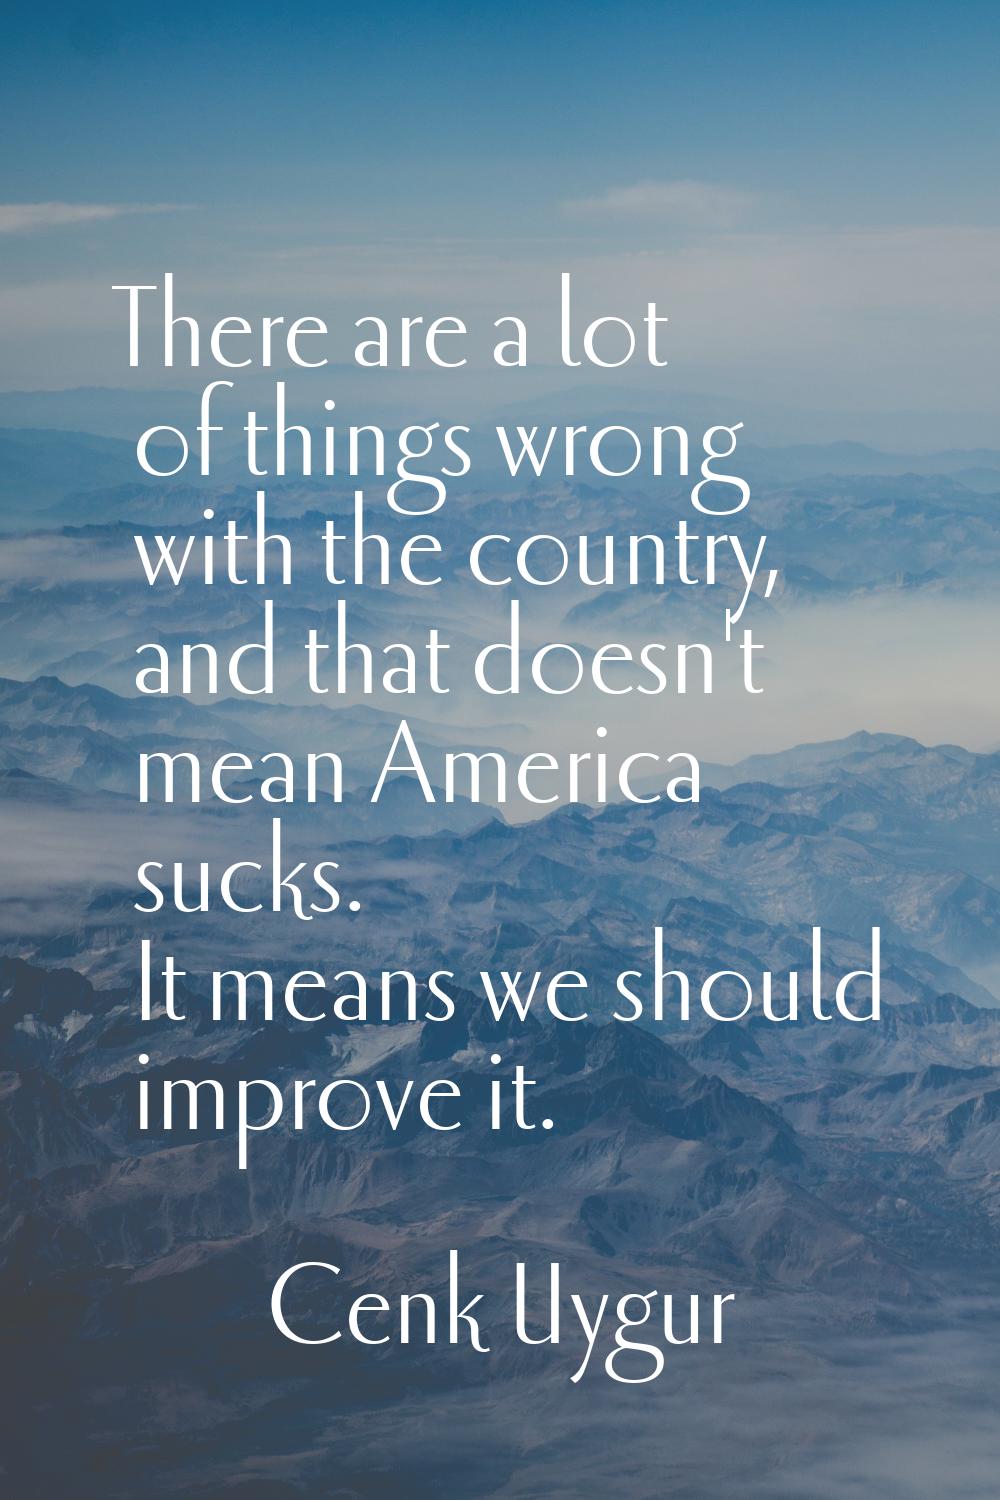 There are a lot of things wrong with the country, and that doesn't mean America sucks. It means we 